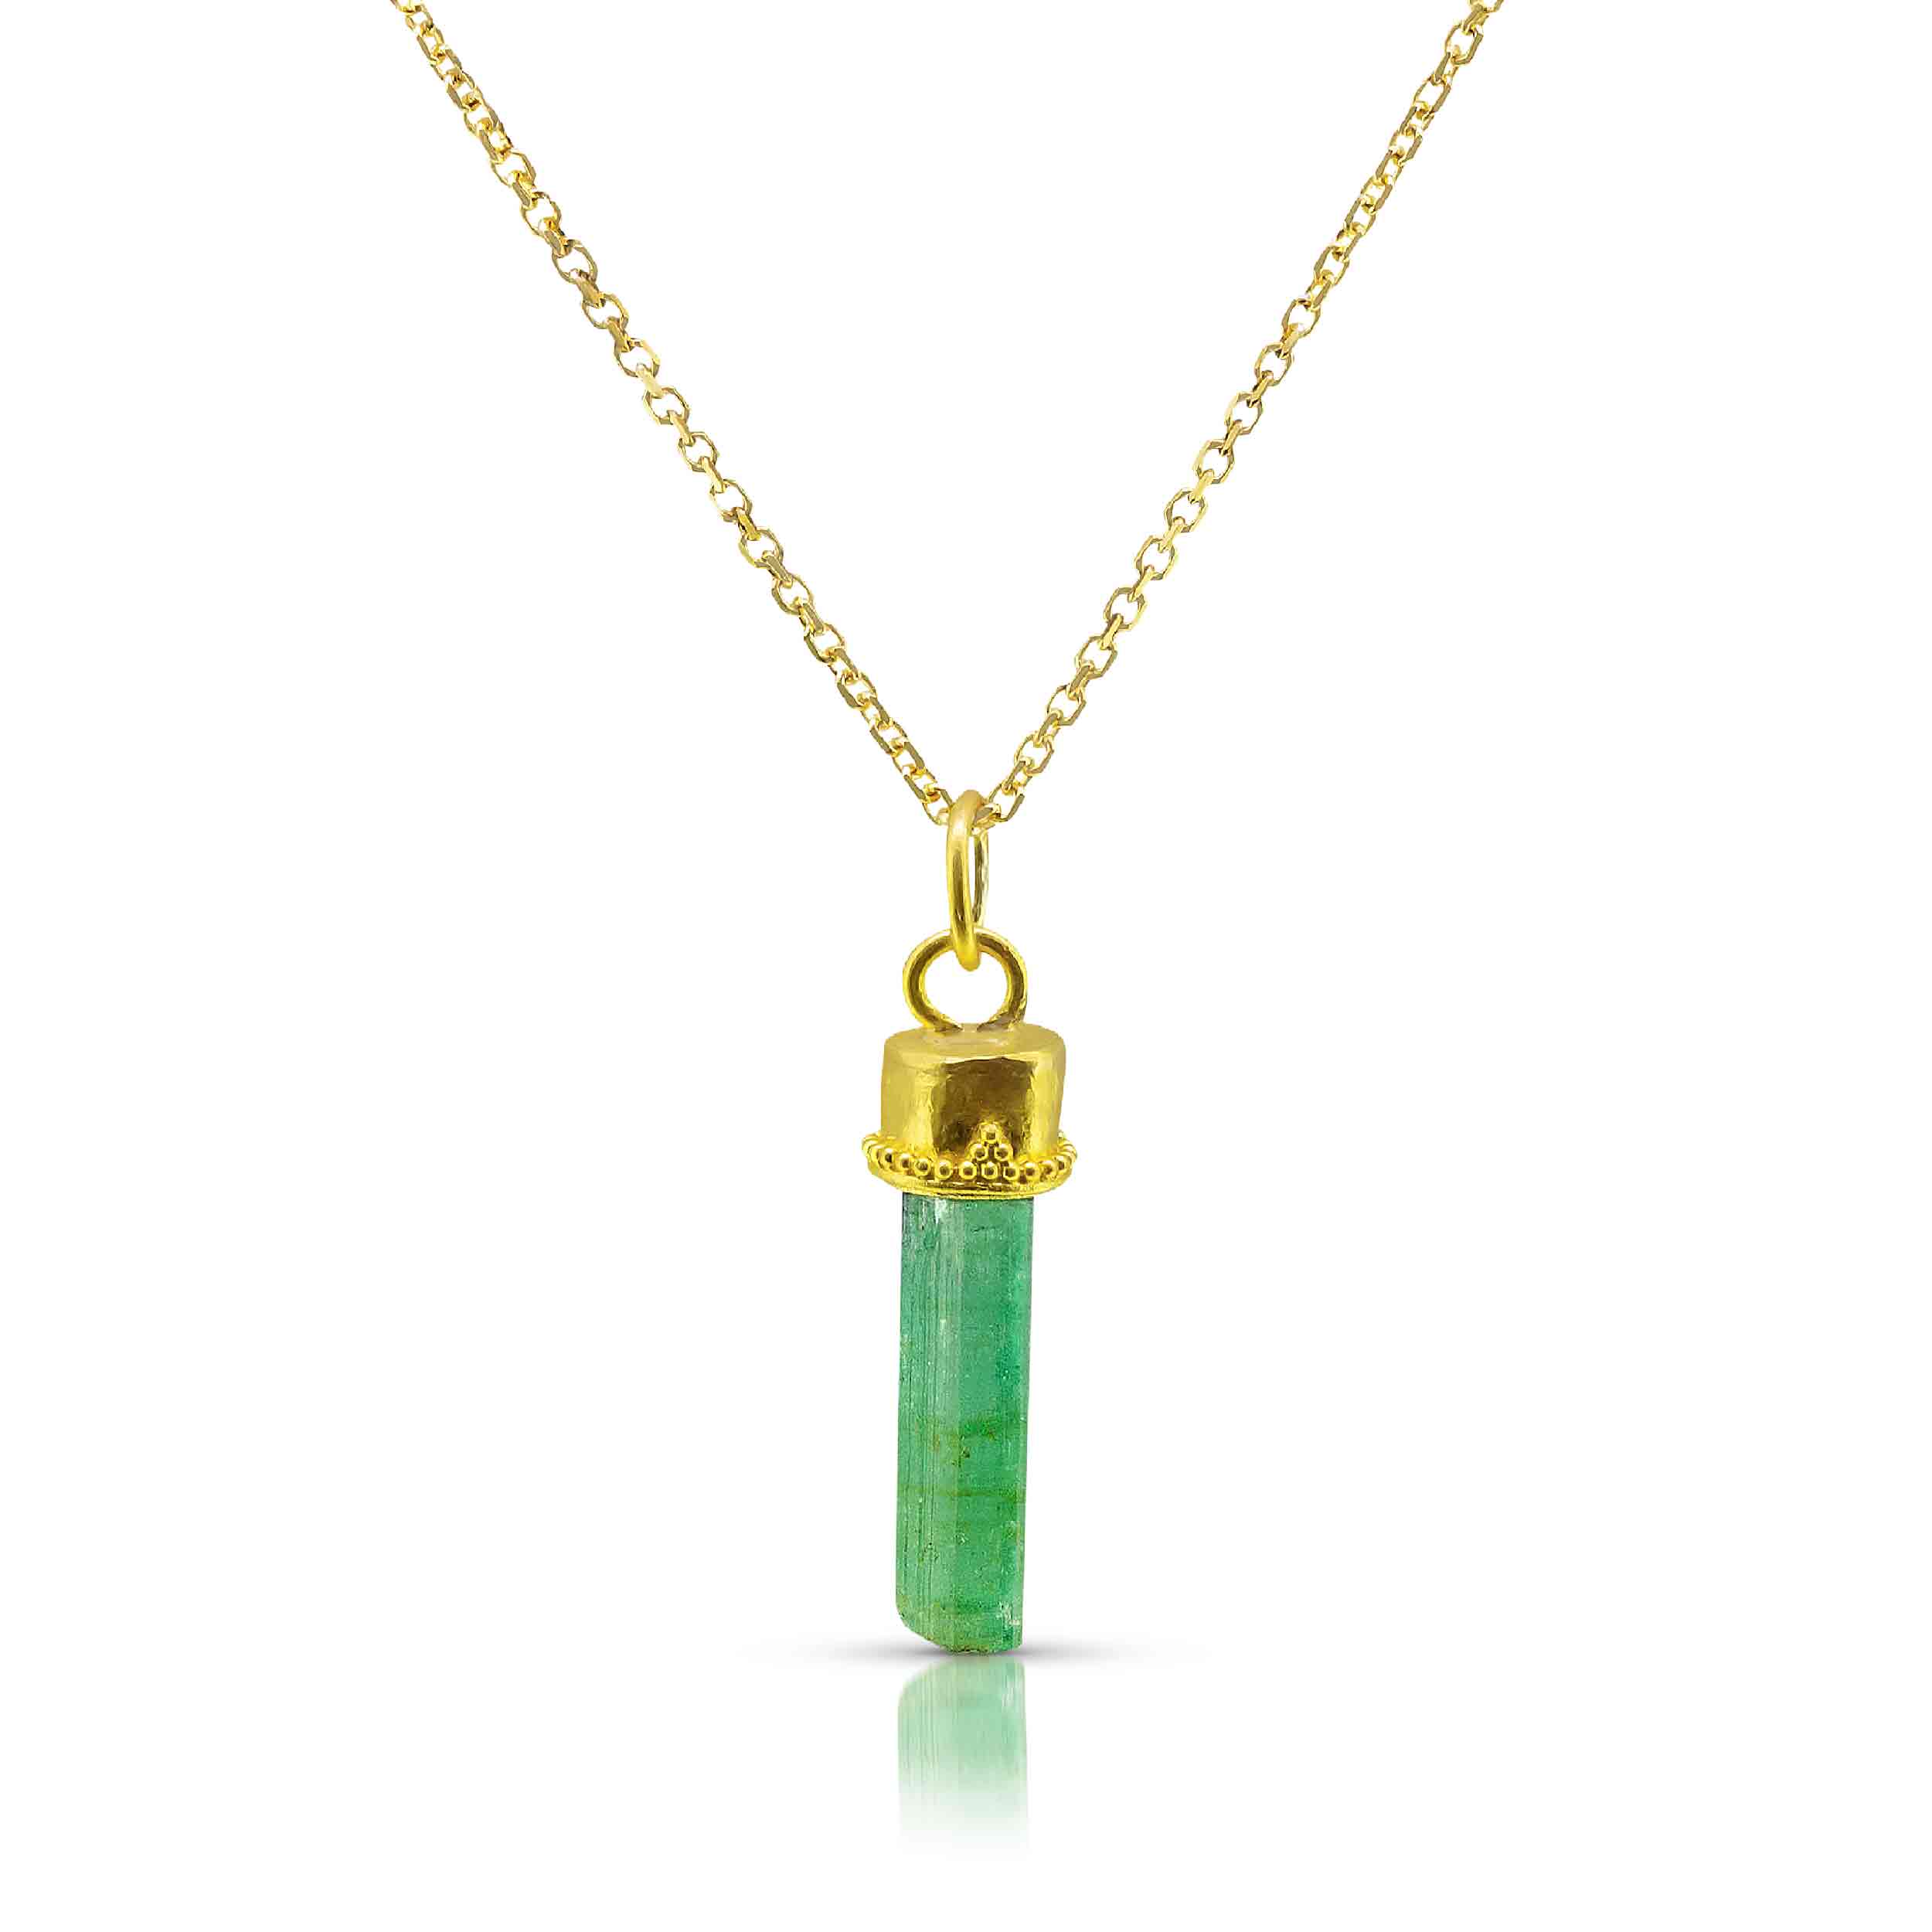 Buy Silver Emerald Green Crystal Pendant for £17.99 | Uneak Boutique